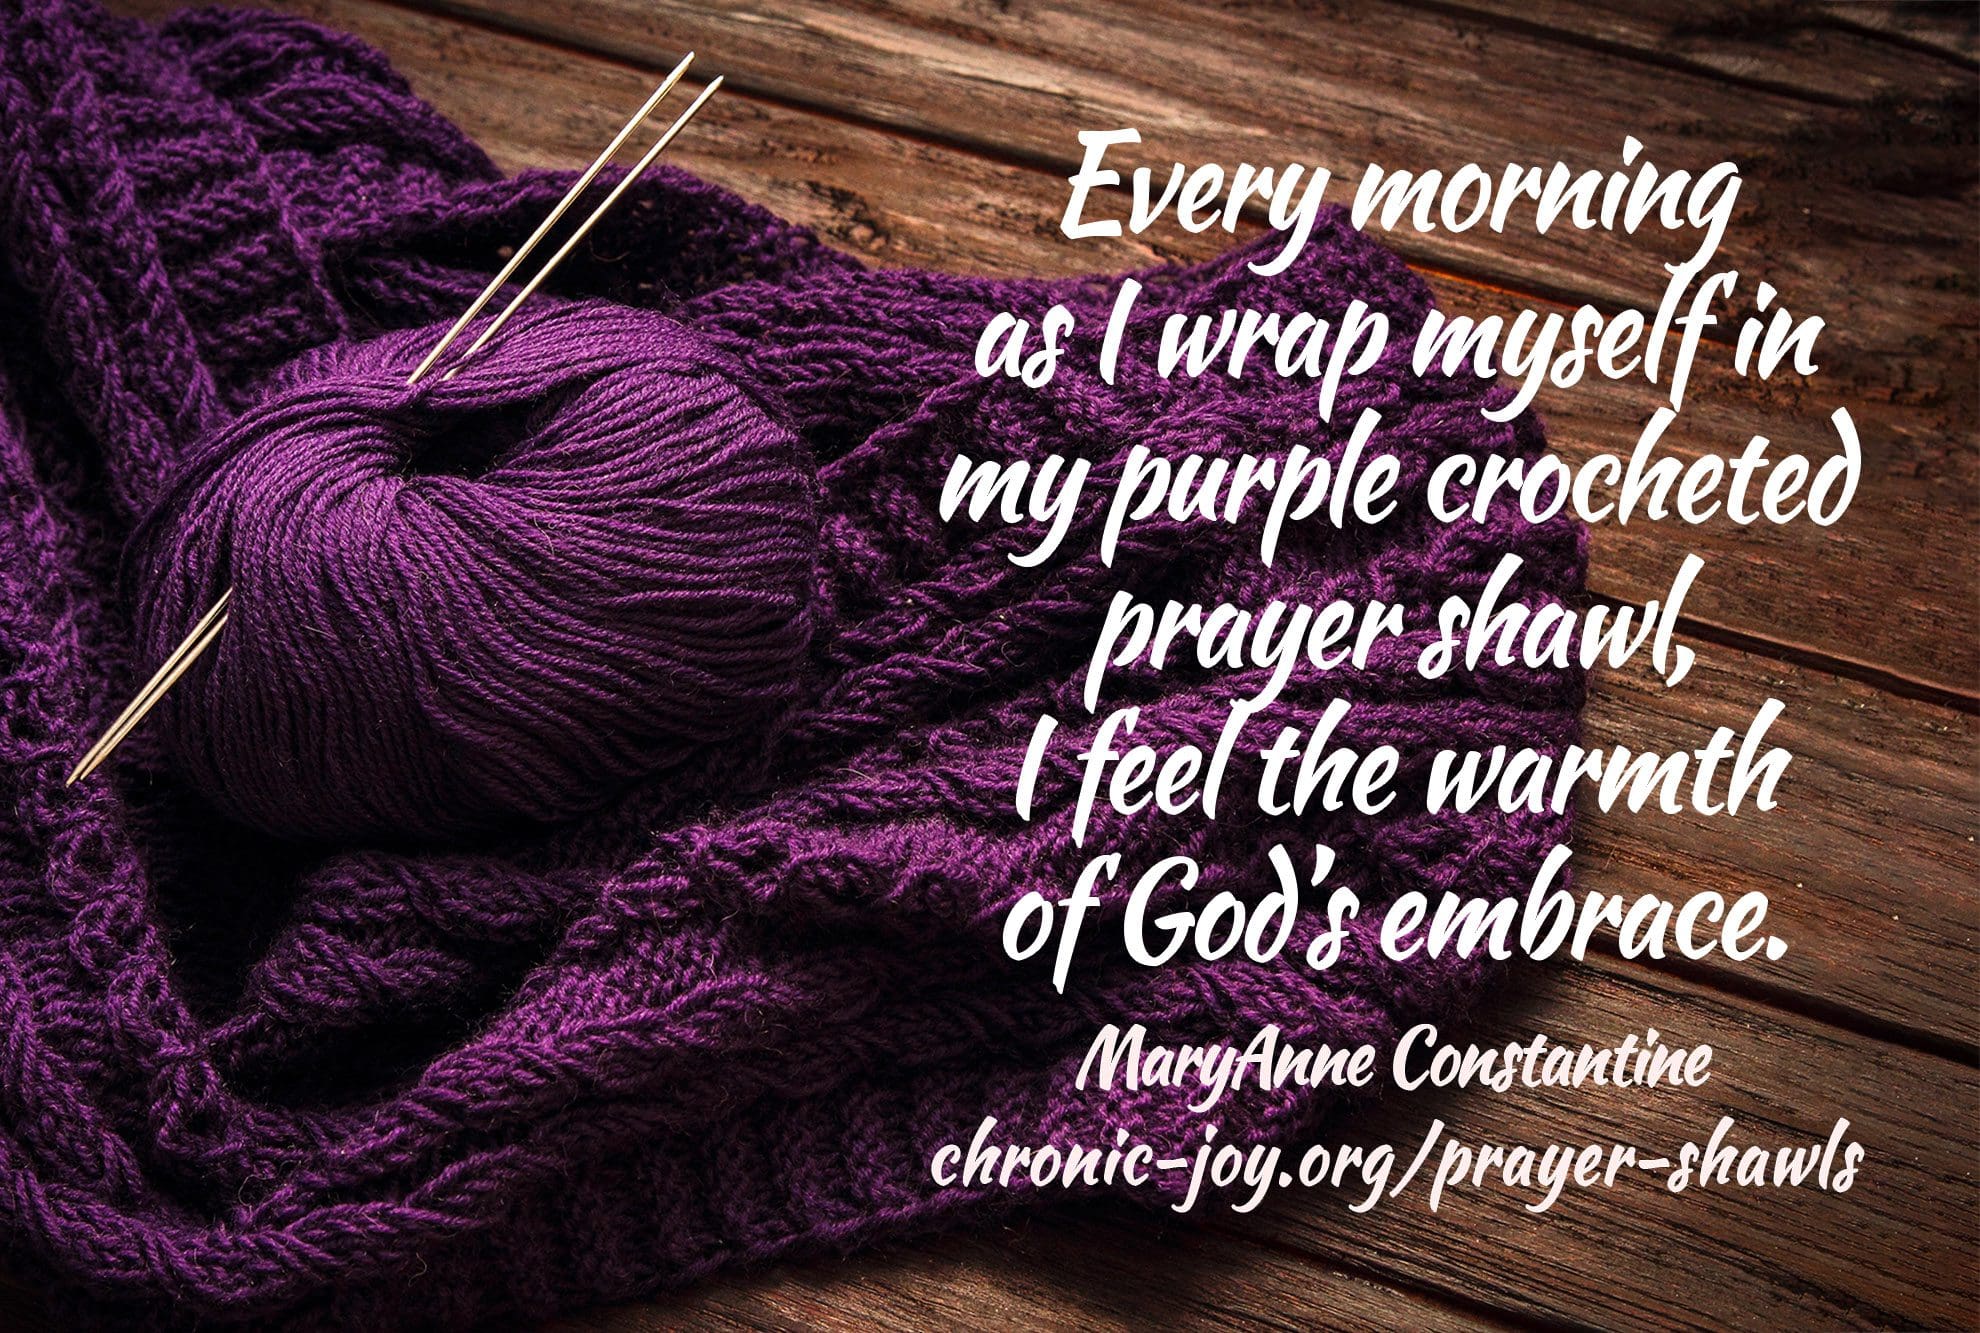 "Every morning as I wrap myself in my purple crocheted prayer shawl, I feel the warmth of God’s embrace." MaryAnne Constantine